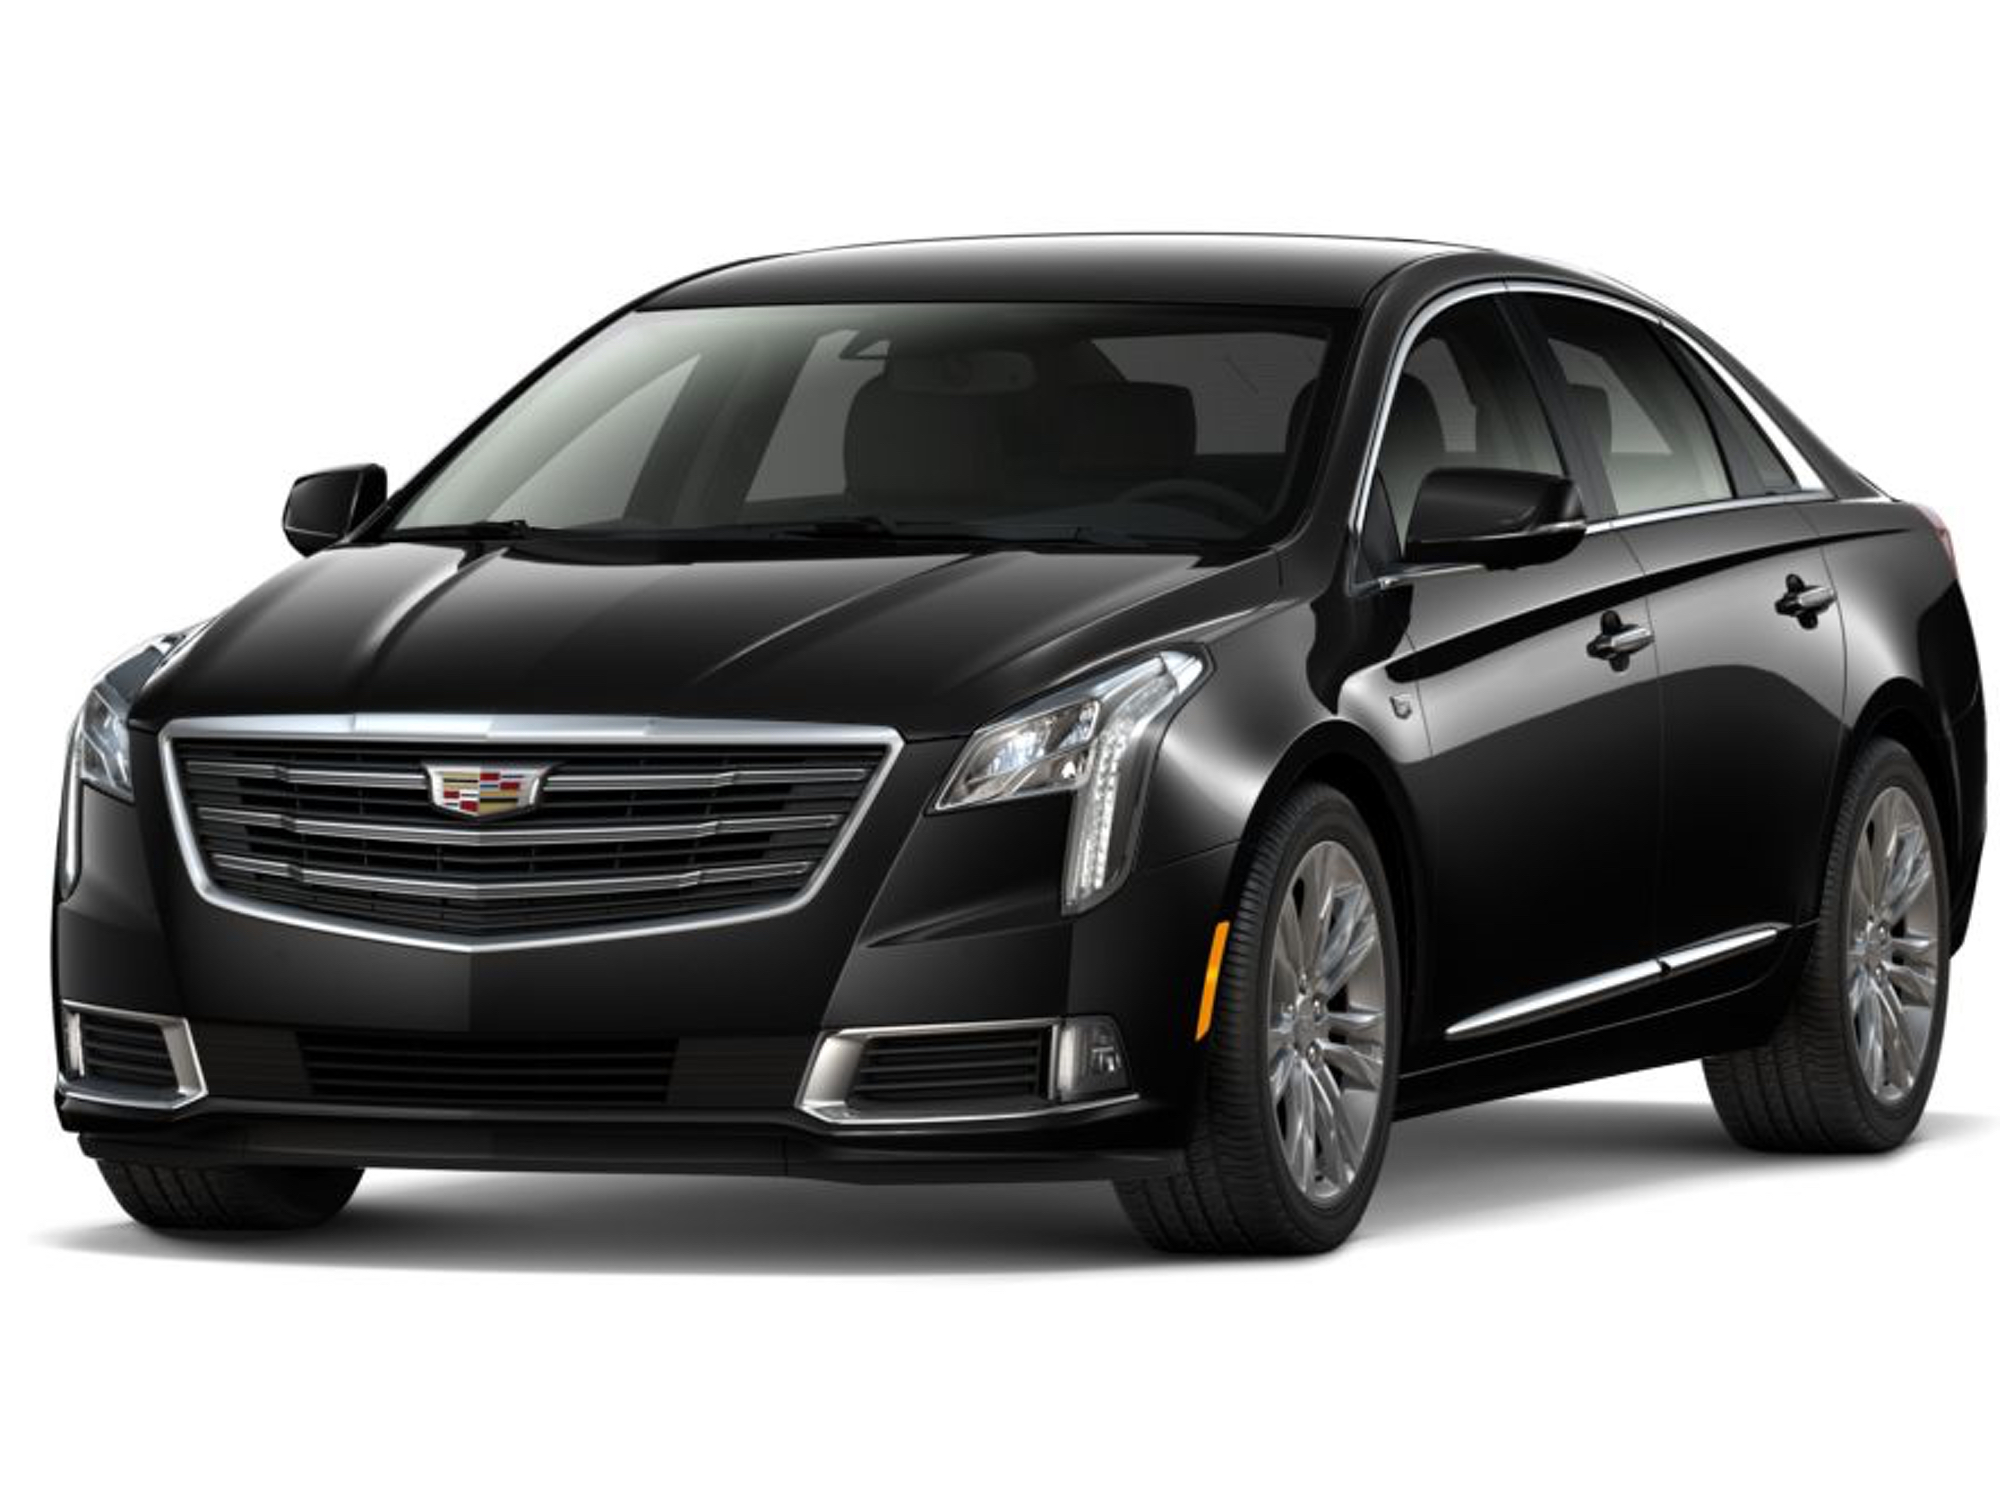 2019 Cadillac XTS Exterior Colors | GM Authority